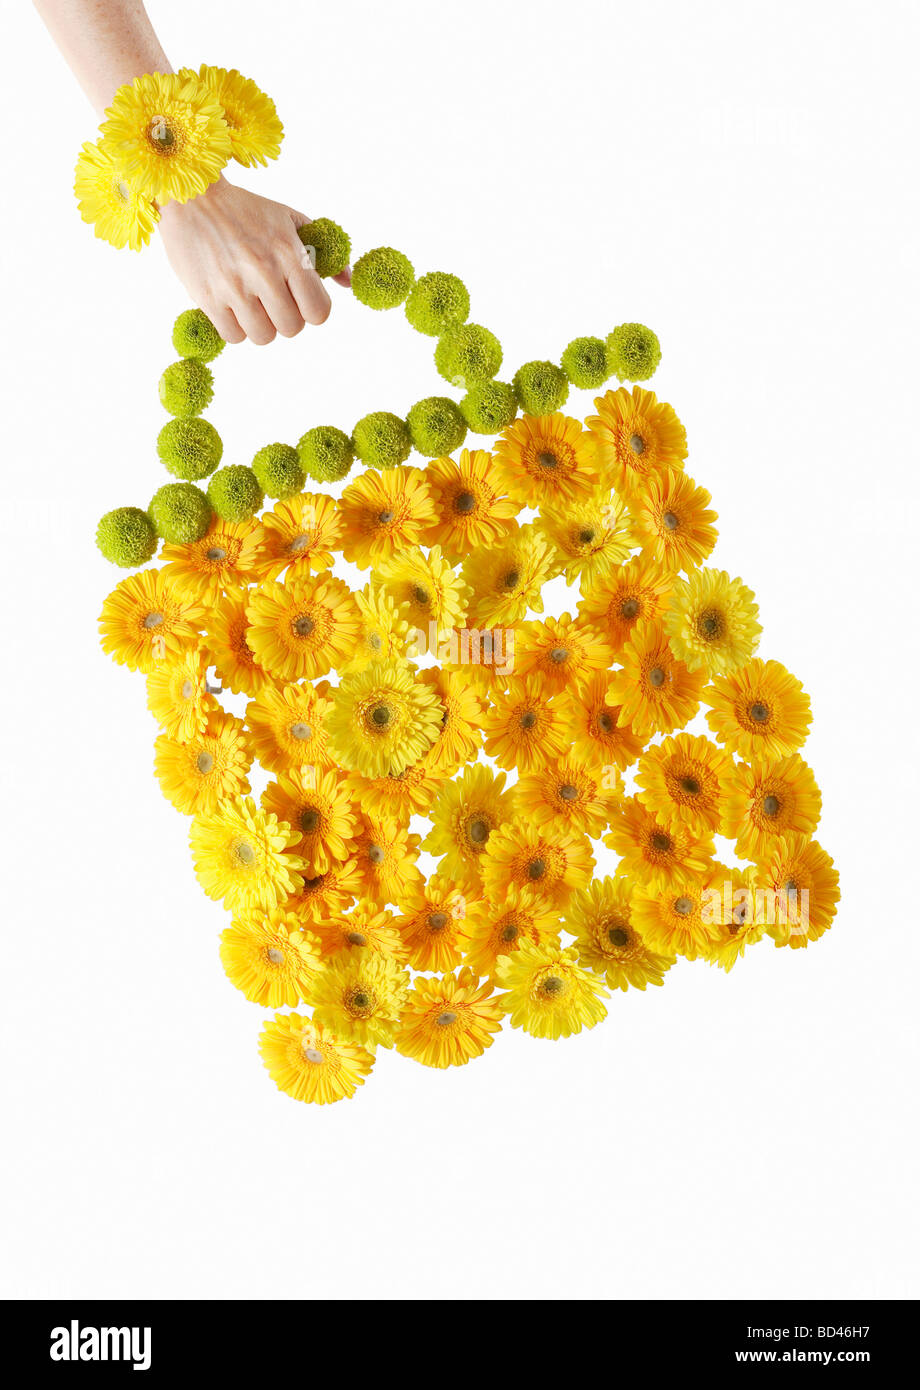 A hand holding a flower bag Stock Photo